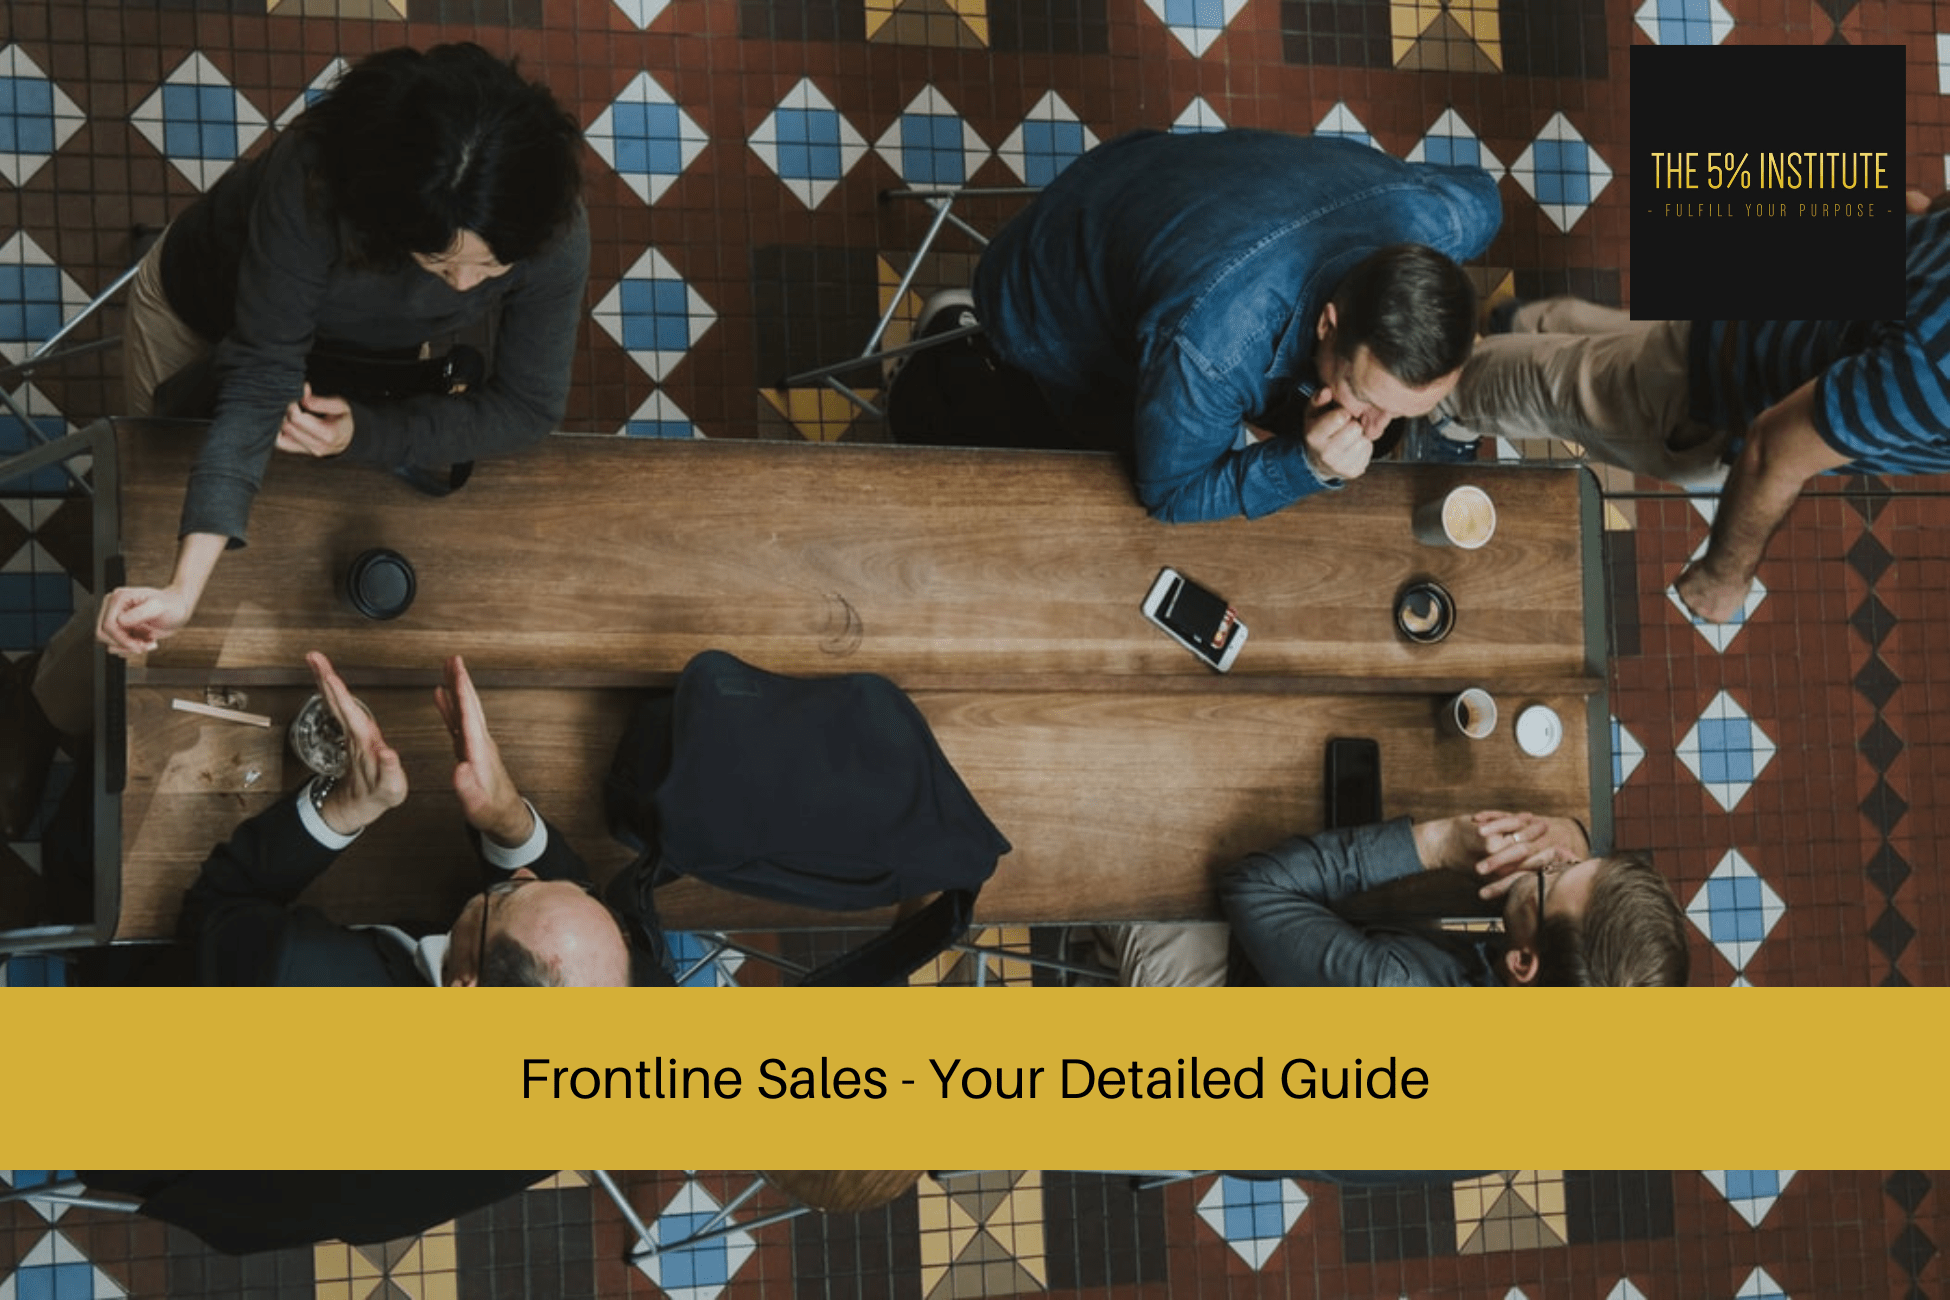 Frontline Sales - Your Detailed Guide